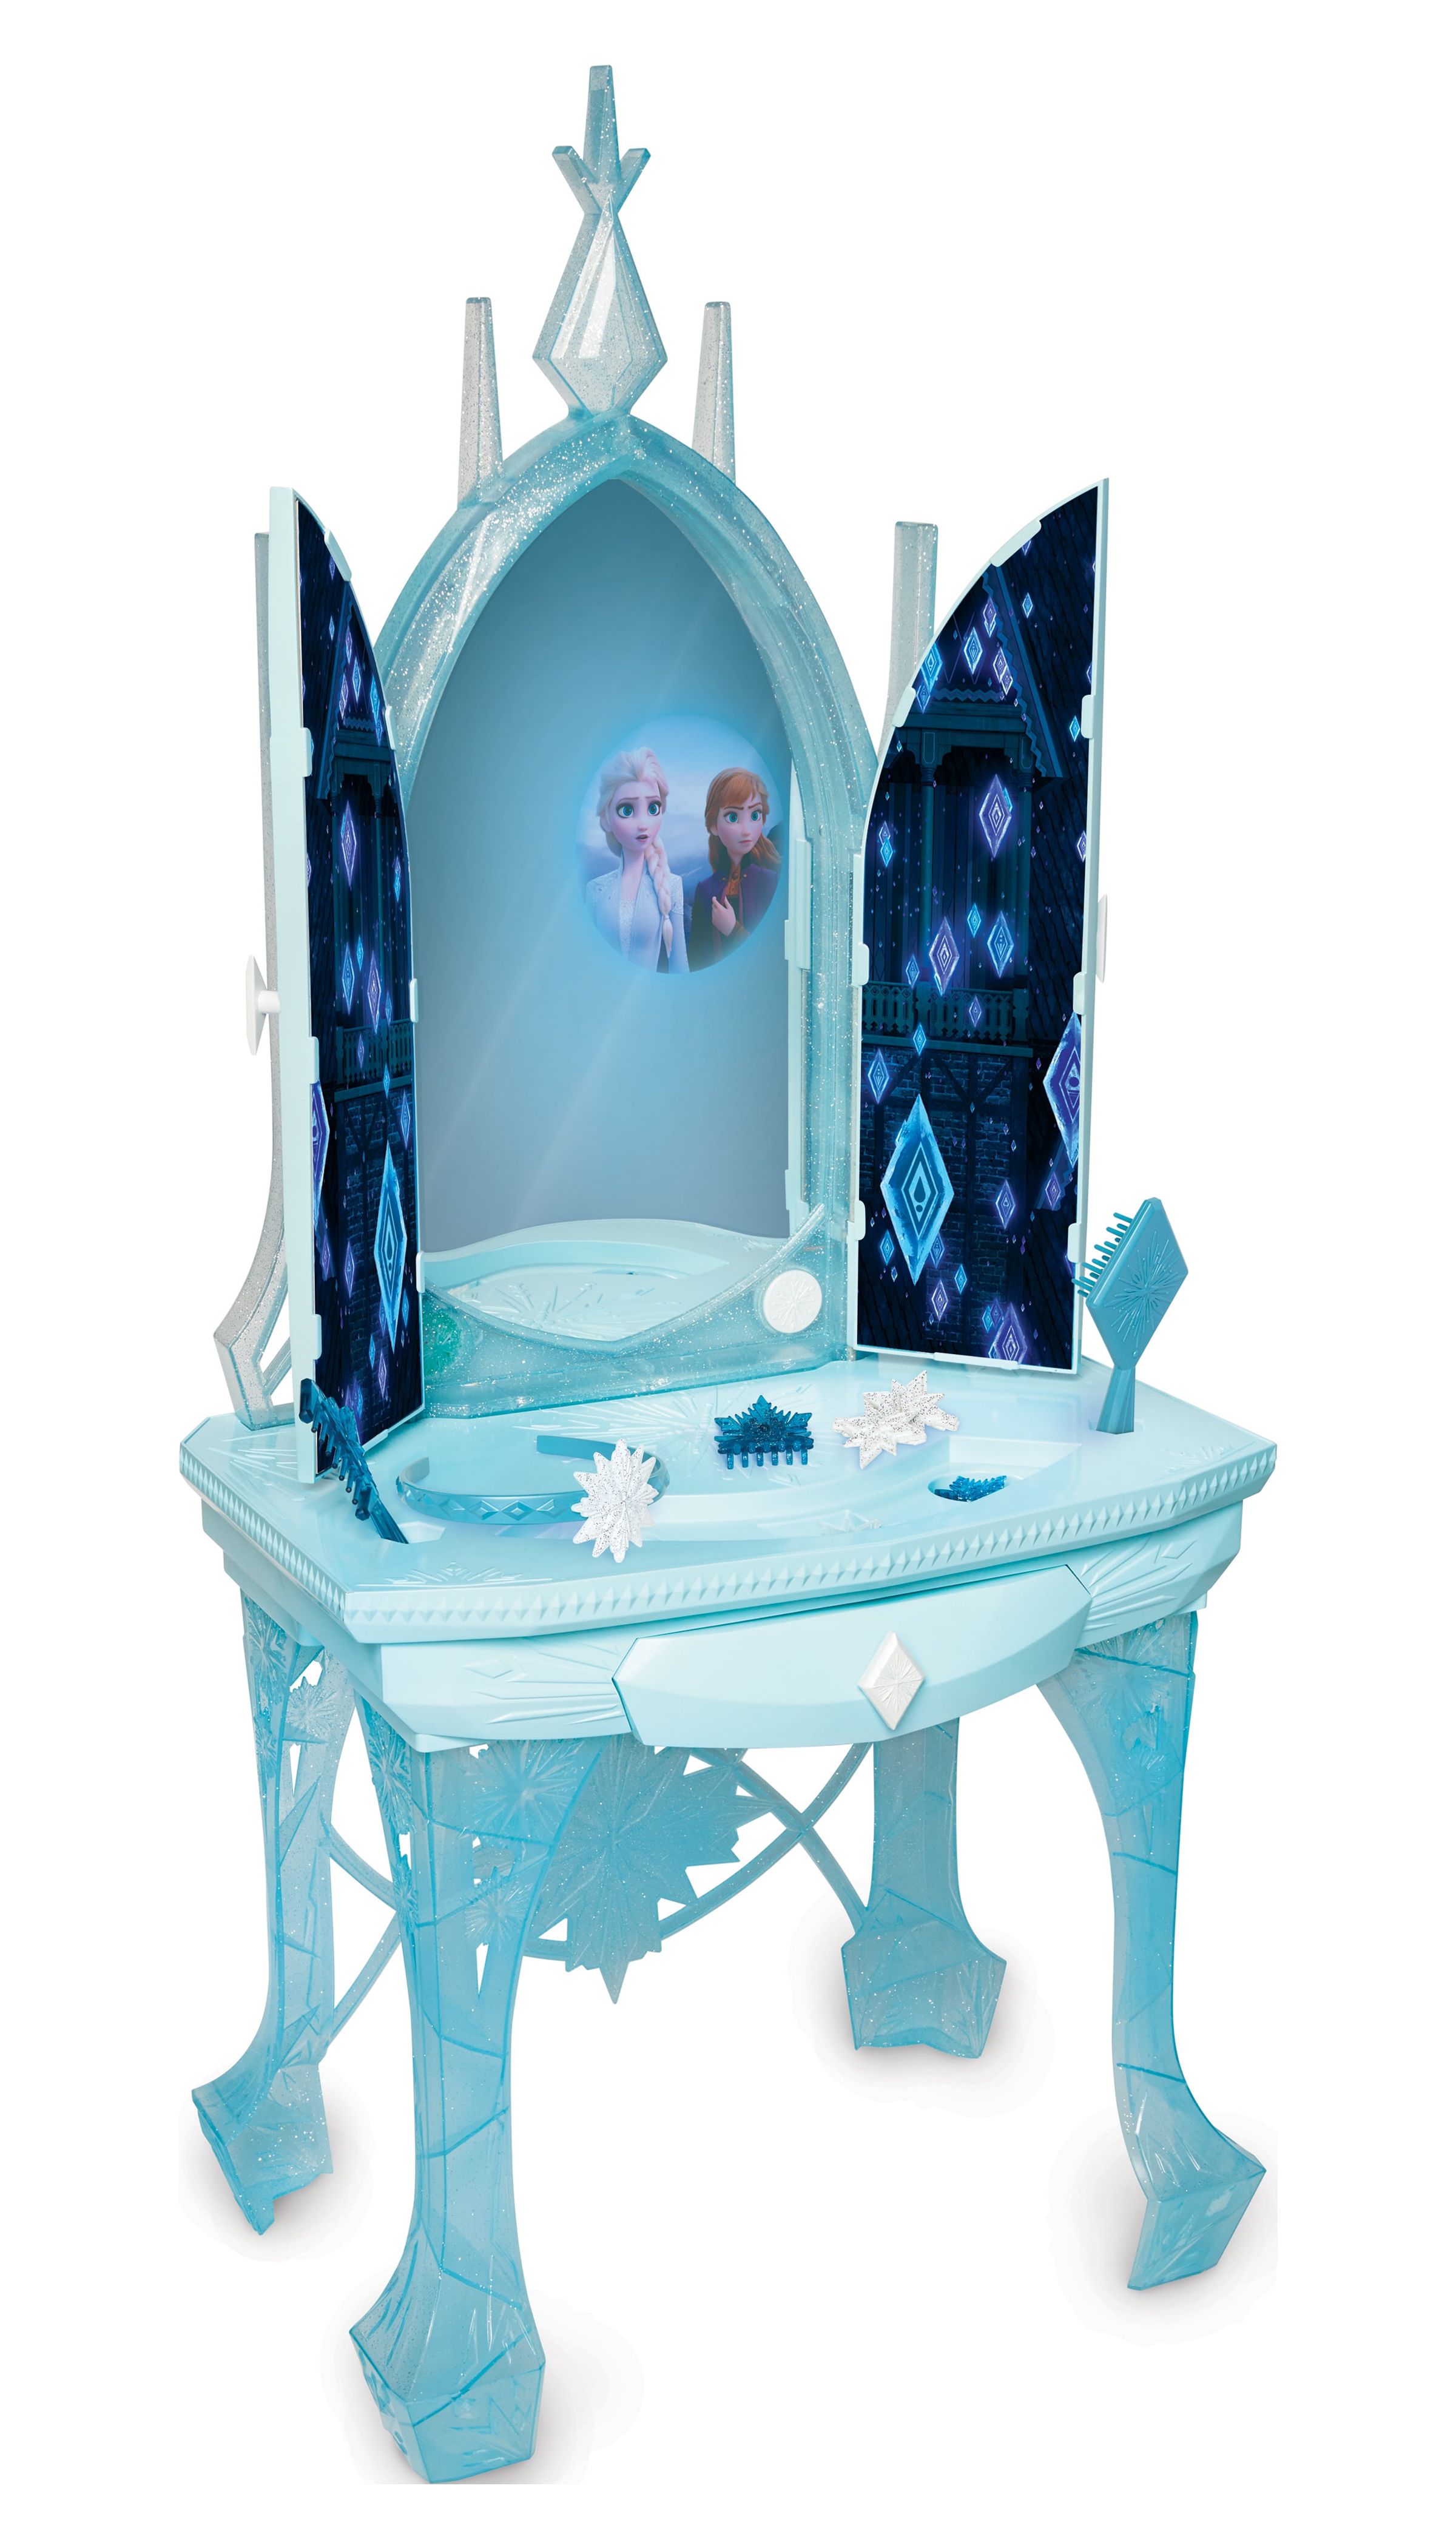 Disney Frozen 2 Elsa's Enchanted Ice Vanity Includes Lights Iconic Story Moments & Plays "Vuelie" and "Into the Unknown" For Ages 3+ - image 1 of 6